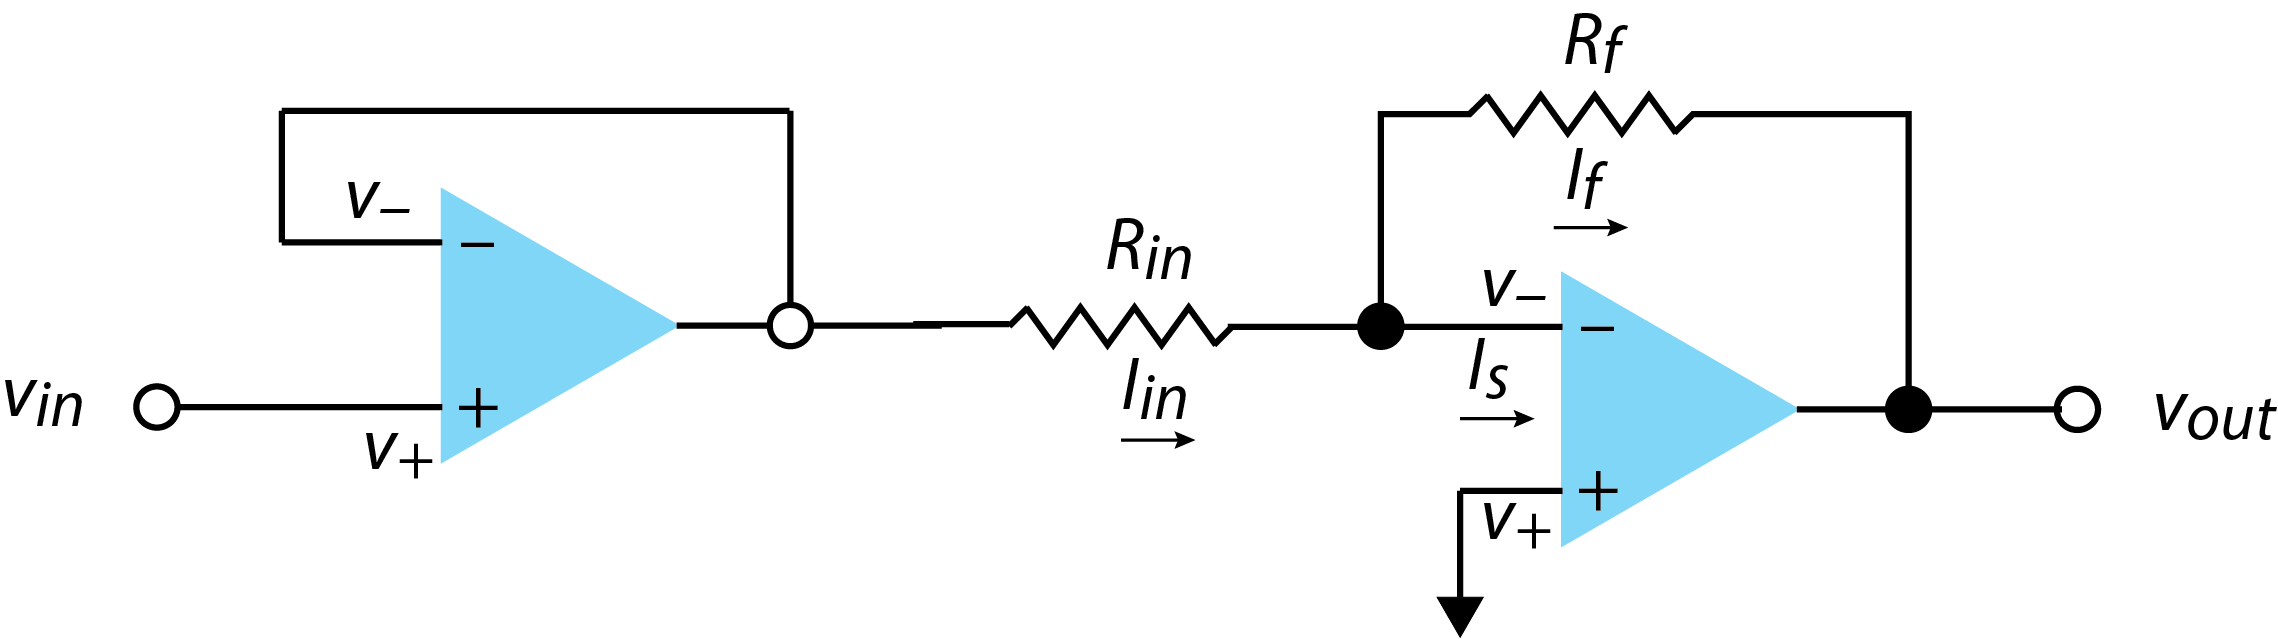 Circuit for measuring voltageusing a voltage follower and an inverting amplifier.